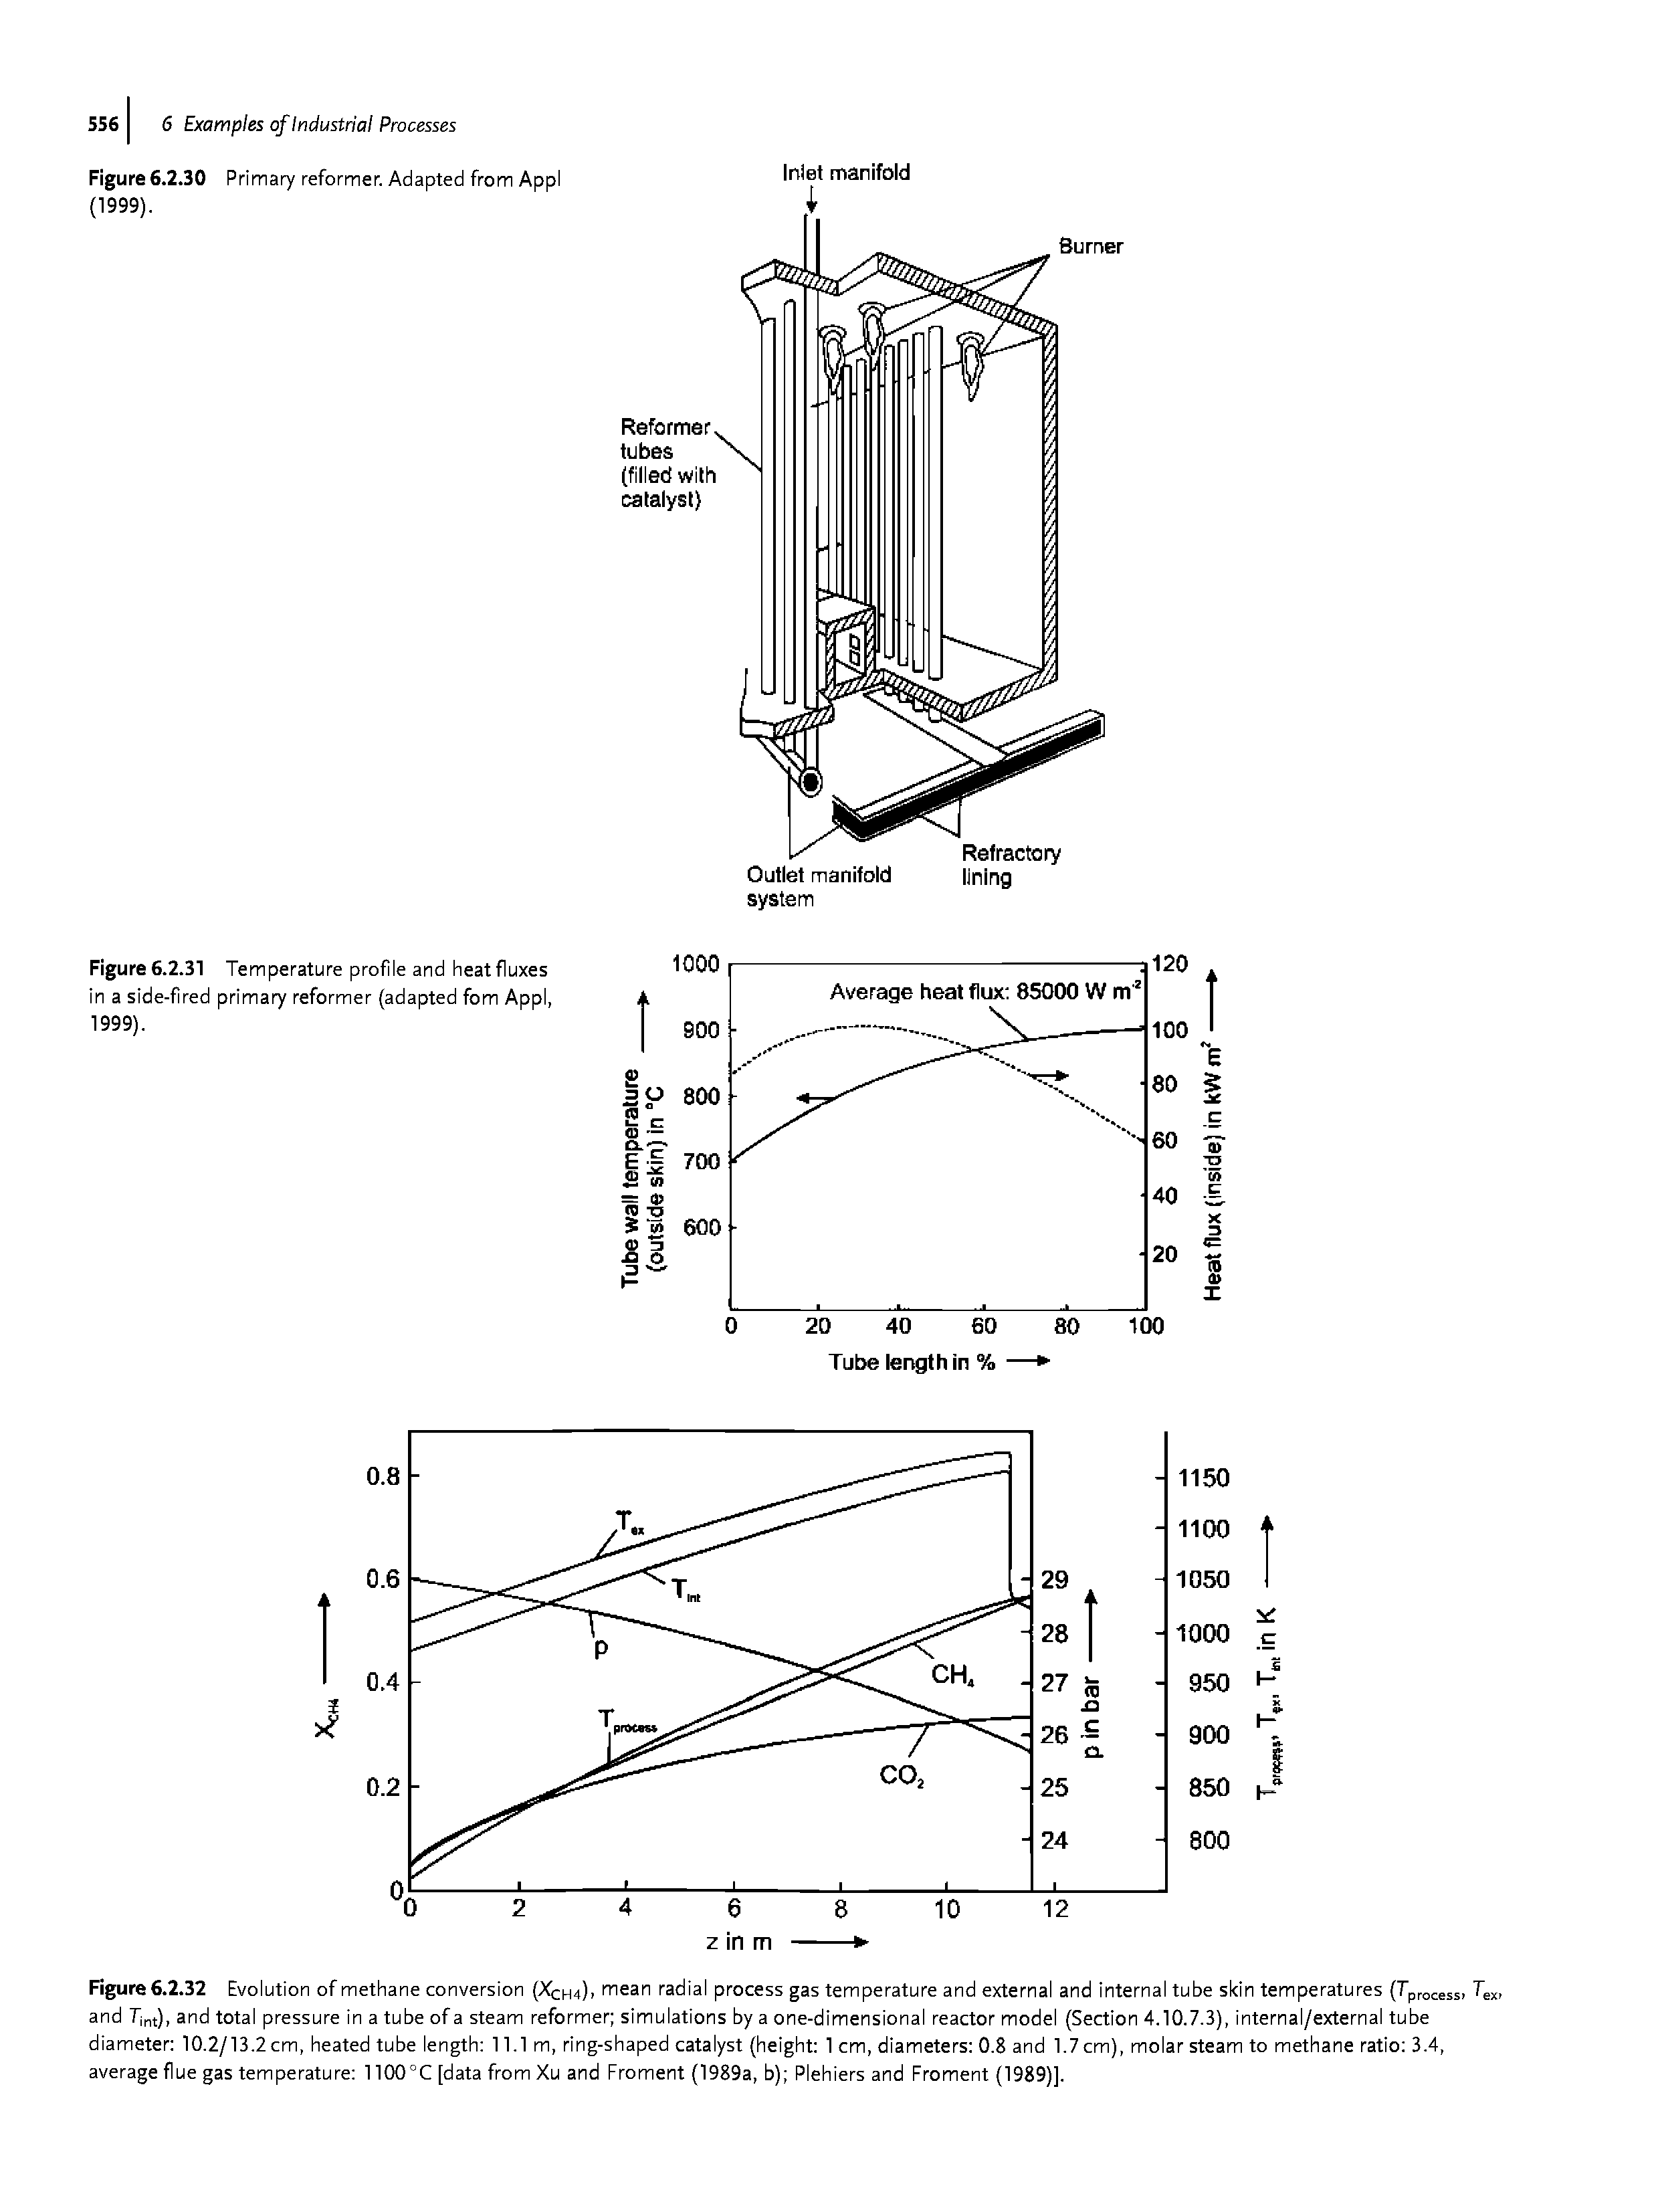 Figure 6.2.32 Evolution of methane conversion ( Ht). mean radial process gas temperature and external and internal tube skin temperatures (Tprocessi and Tint), and total pressure in a tube of a steam reformer simulations by a one-dimensional reactor model (Section 4.10.7.3), internal/external tube diameter 10.2/13.2cm, heated tube length 11.1m, ring-shaped catalyst (height 1 cm, diameters 0.8 and 1.7cm), molar steam to methane ratio 3.4, average flue gas temperature 1100°C [data from Xu and Froment (1989a, b) Plehiers and Froment (1989)].